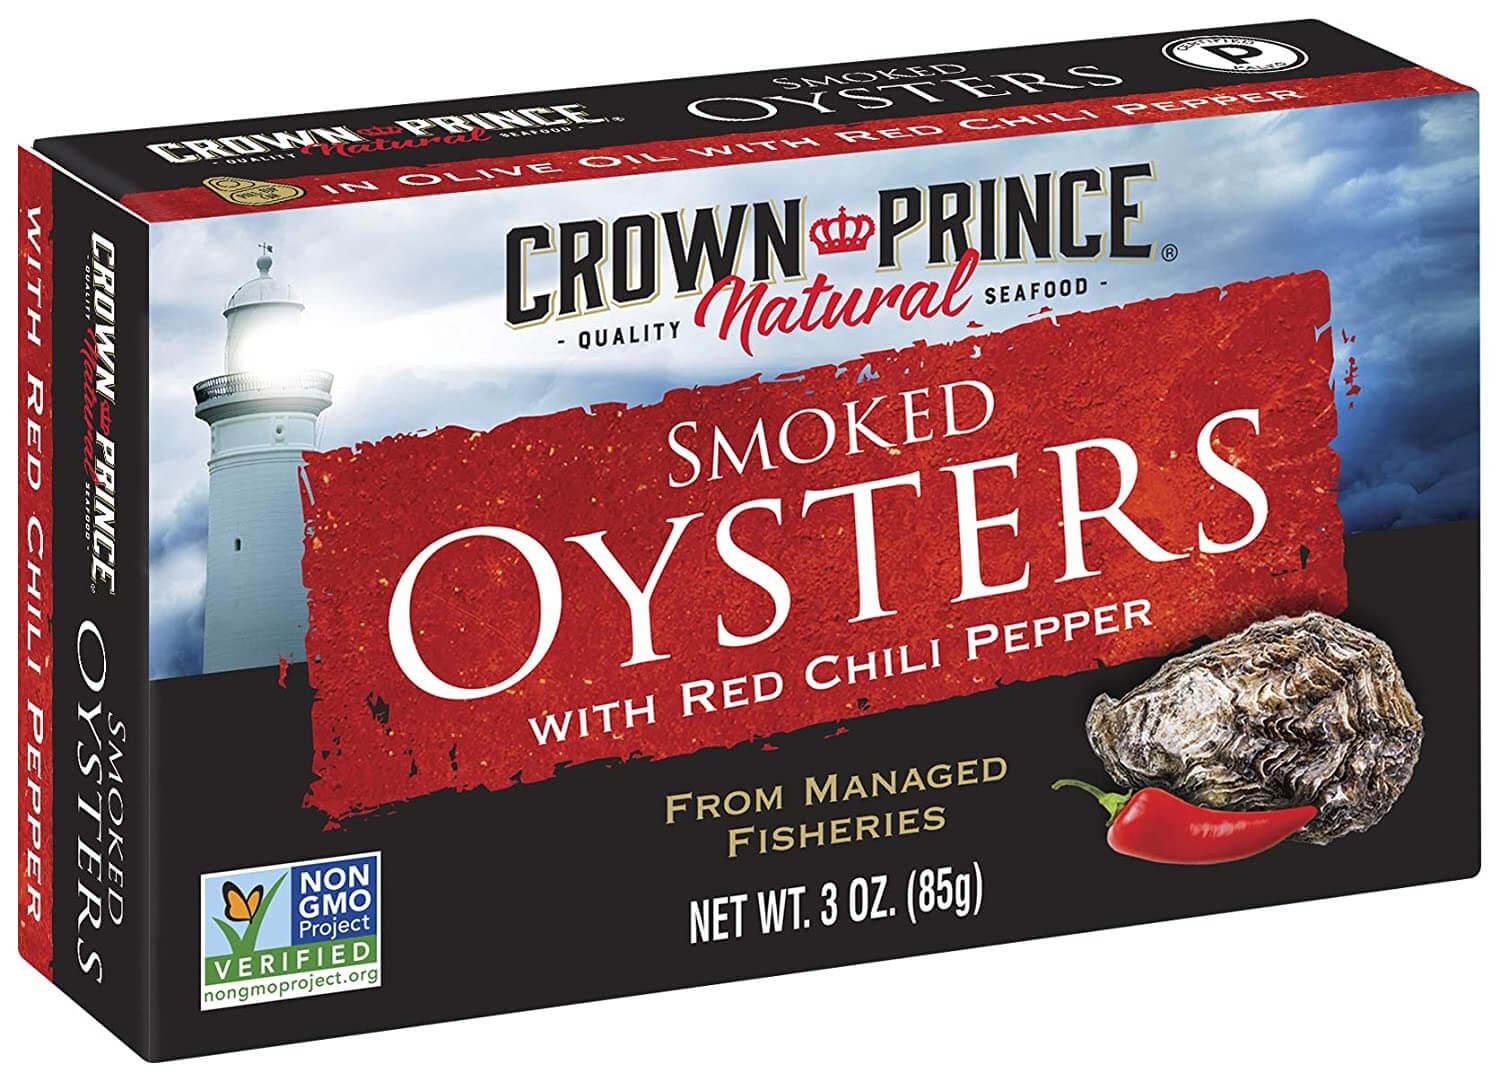 Crown Prince Natural Smoked Oysters with Red Chili Pepper